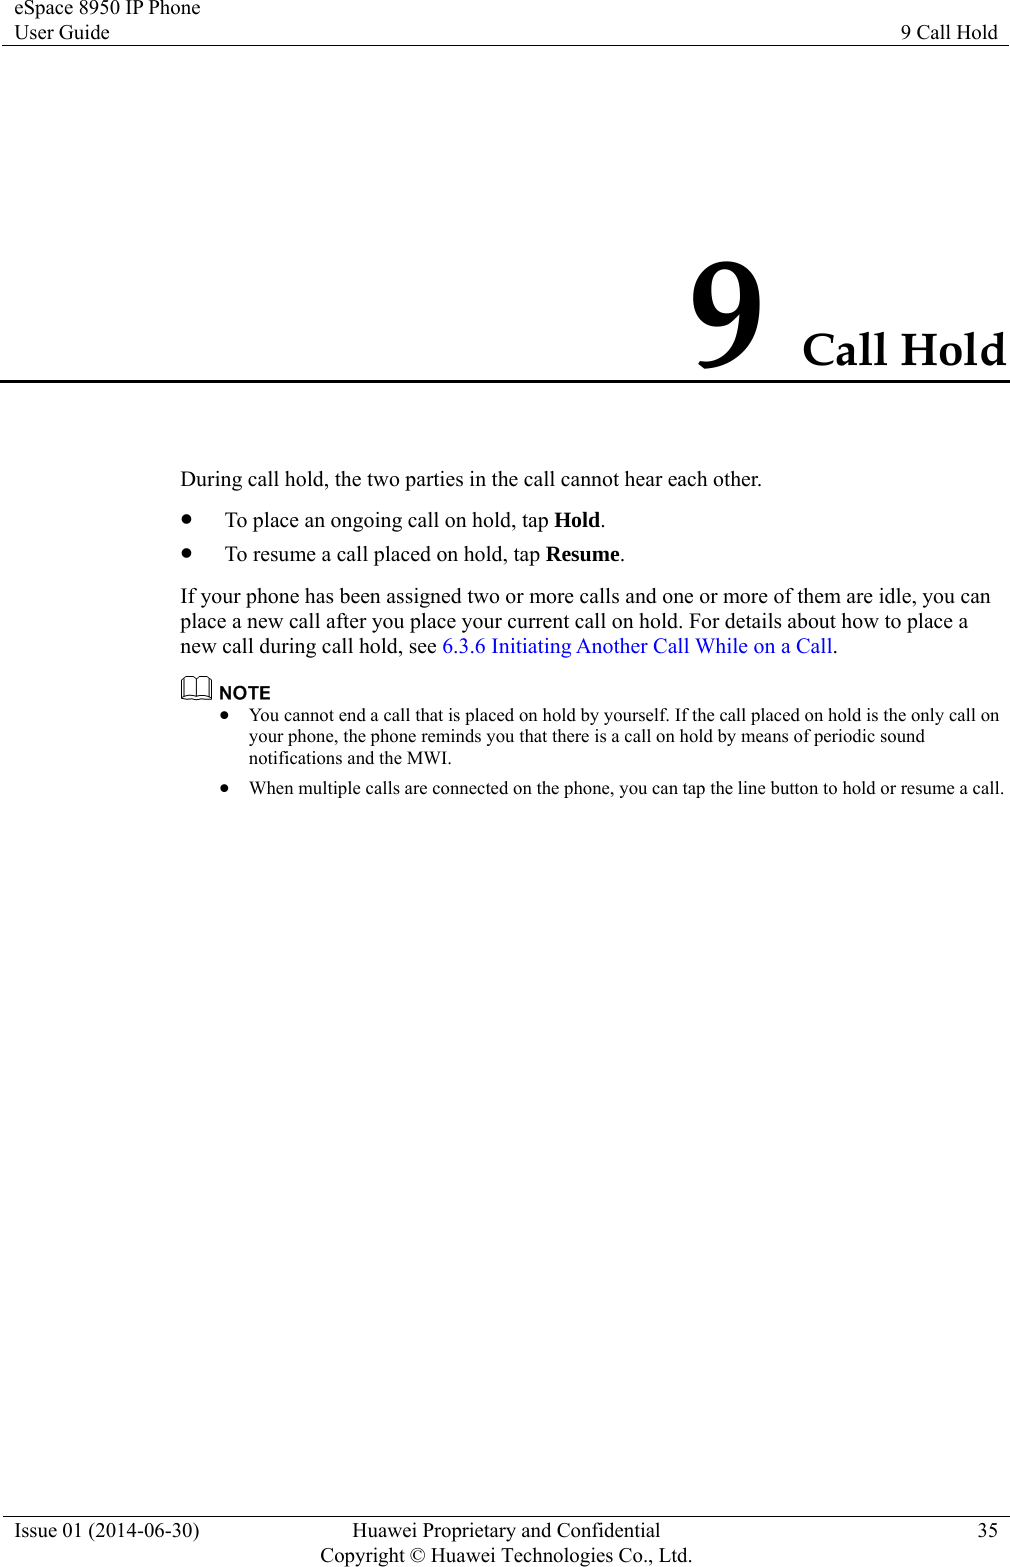 eSpace 8950 IP Phone User Guide  9 Call Hold Issue 01 (2014-06-30)  Huawei Proprietary and Confidential         Copyright © Huawei Technologies Co., Ltd.35 9 Call Hold During call hold, the two parties in the call cannot hear each other.  To place an ongoing call on hold, tap Hold.  To resume a call placed on hold, tap Resume. If your phone has been assigned two or more calls and one or more of them are idle, you can place a new call after you place your current call on hold. For details about how to place a new call during call hold, see 6.3.6 Initiating Another Call While on a Call.   You cannot end a call that is placed on hold by yourself. If the call placed on hold is the only call on your phone, the phone reminds you that there is a call on hold by means of periodic sound notifications and the MWI.  When multiple calls are connected on the phone, you can tap the line button to hold or resume a call. 